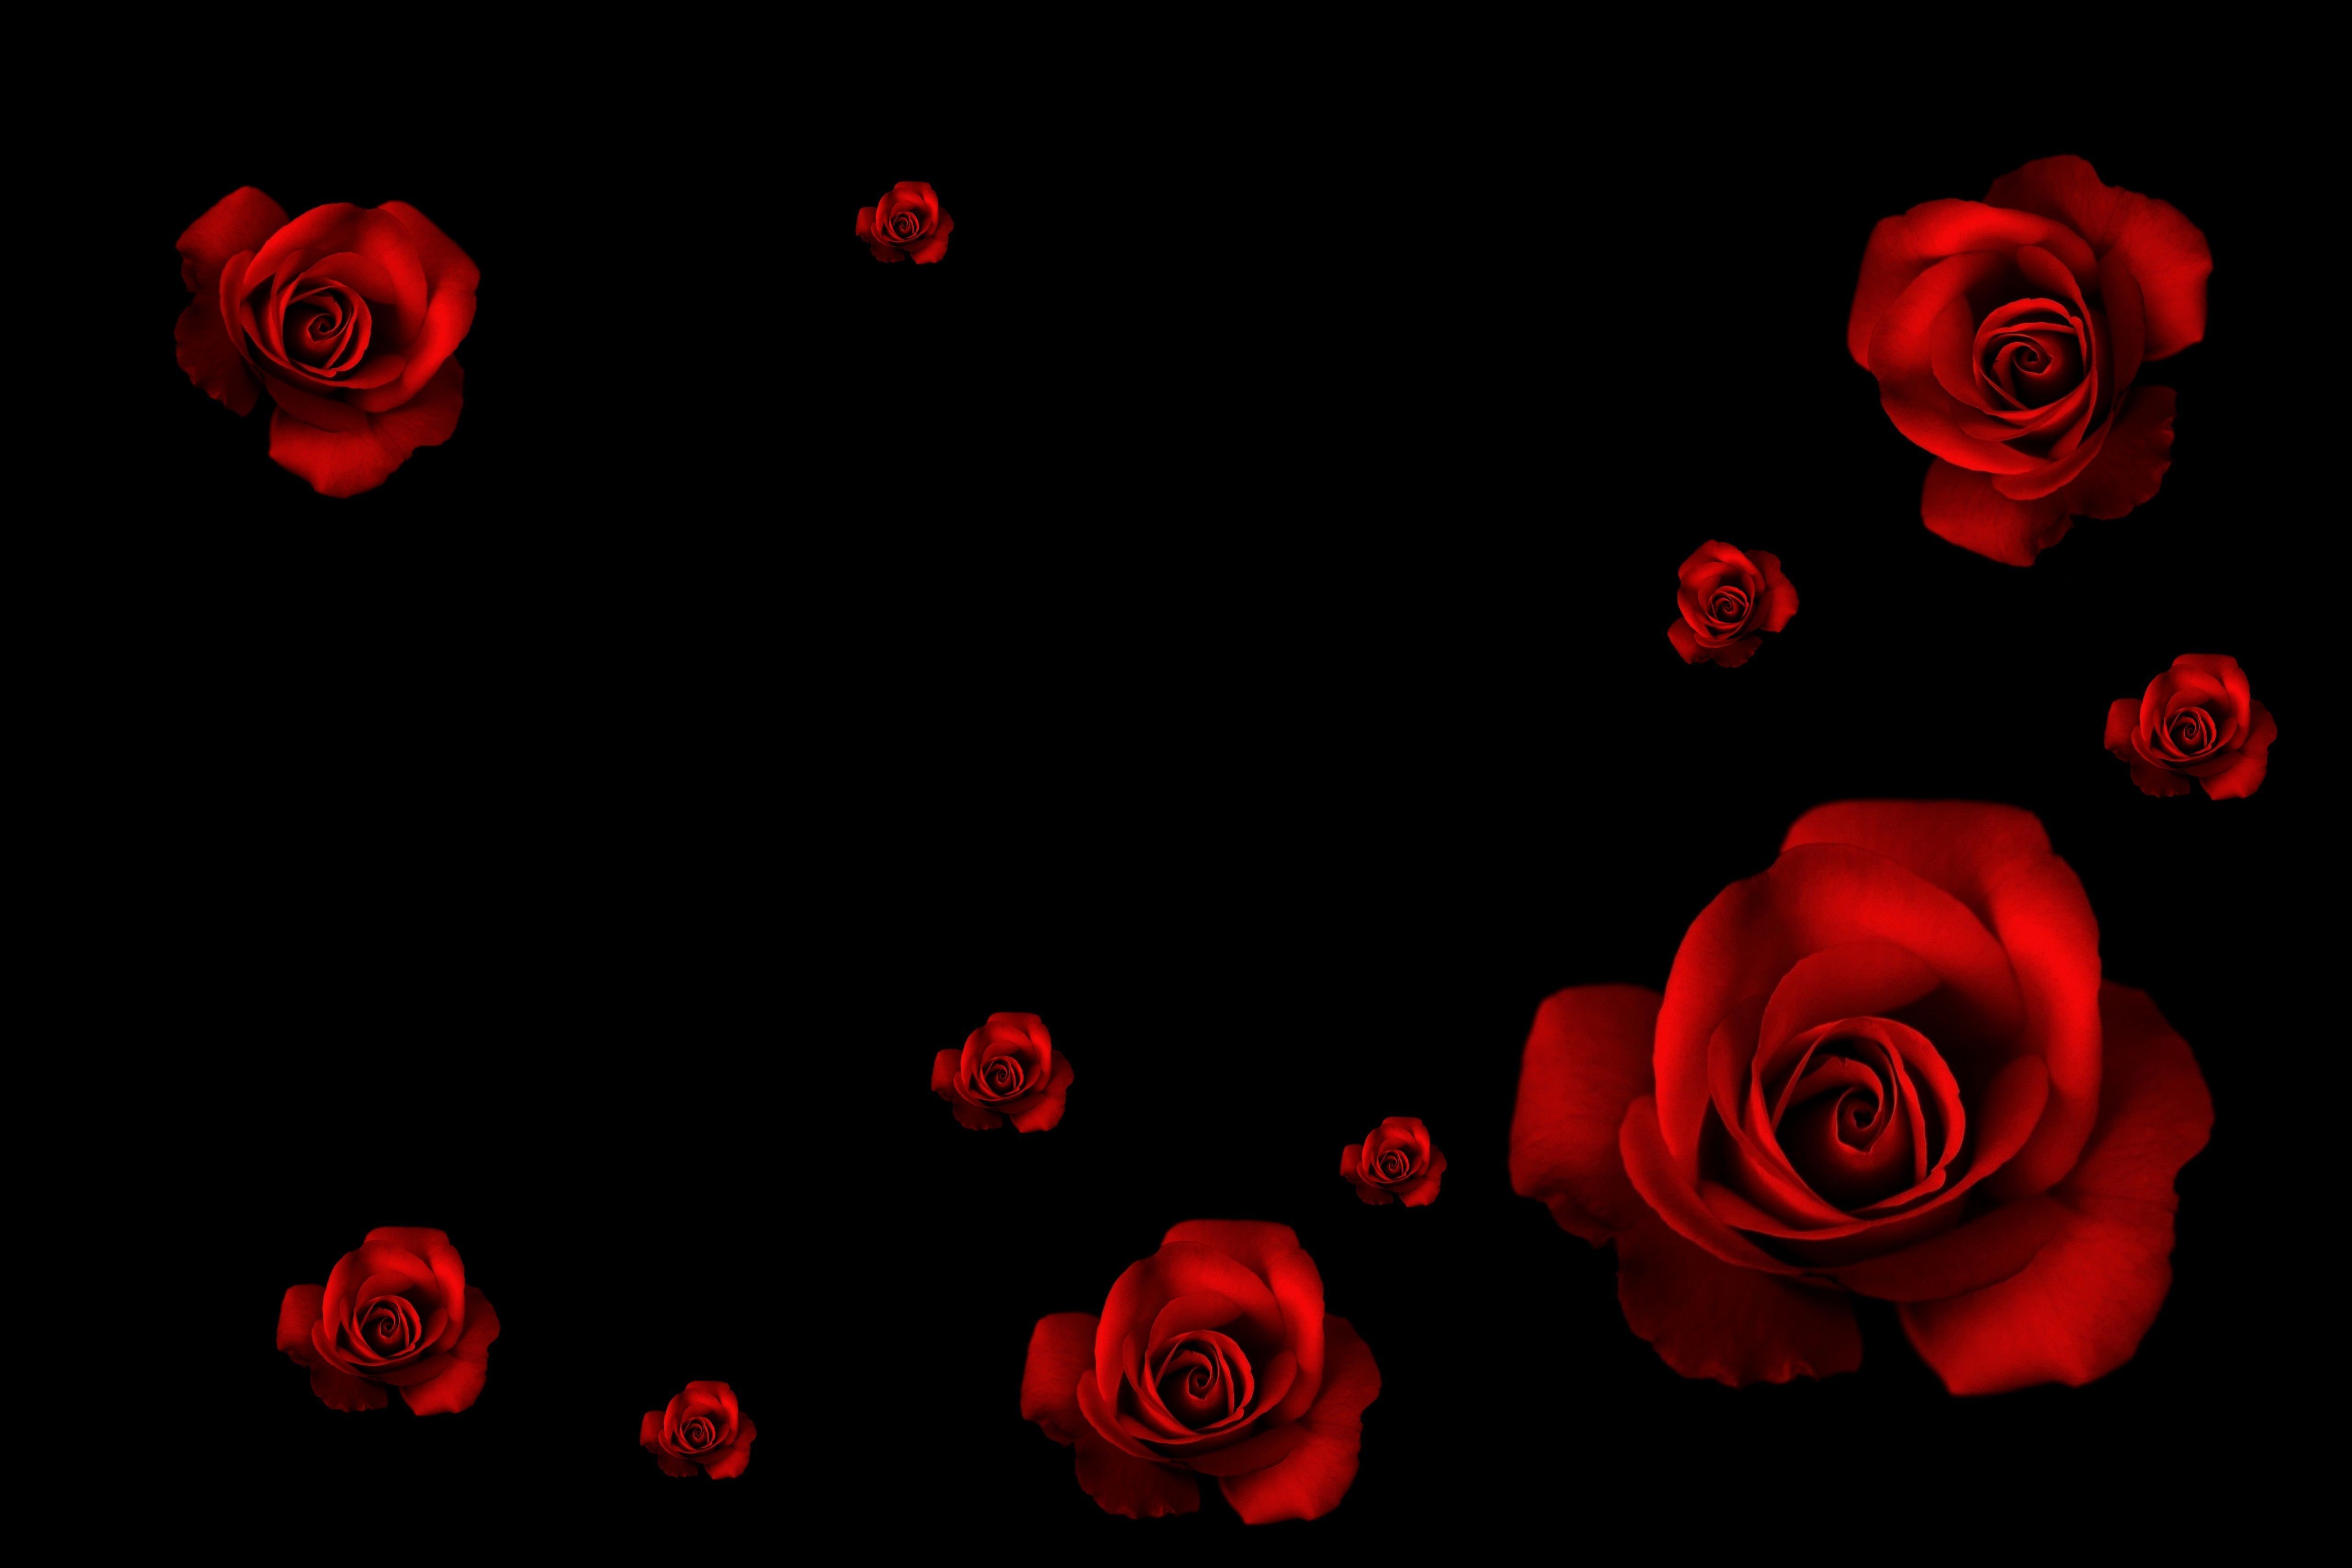 Red Rose Aesthetic Wallpapers on WallpaperDog.